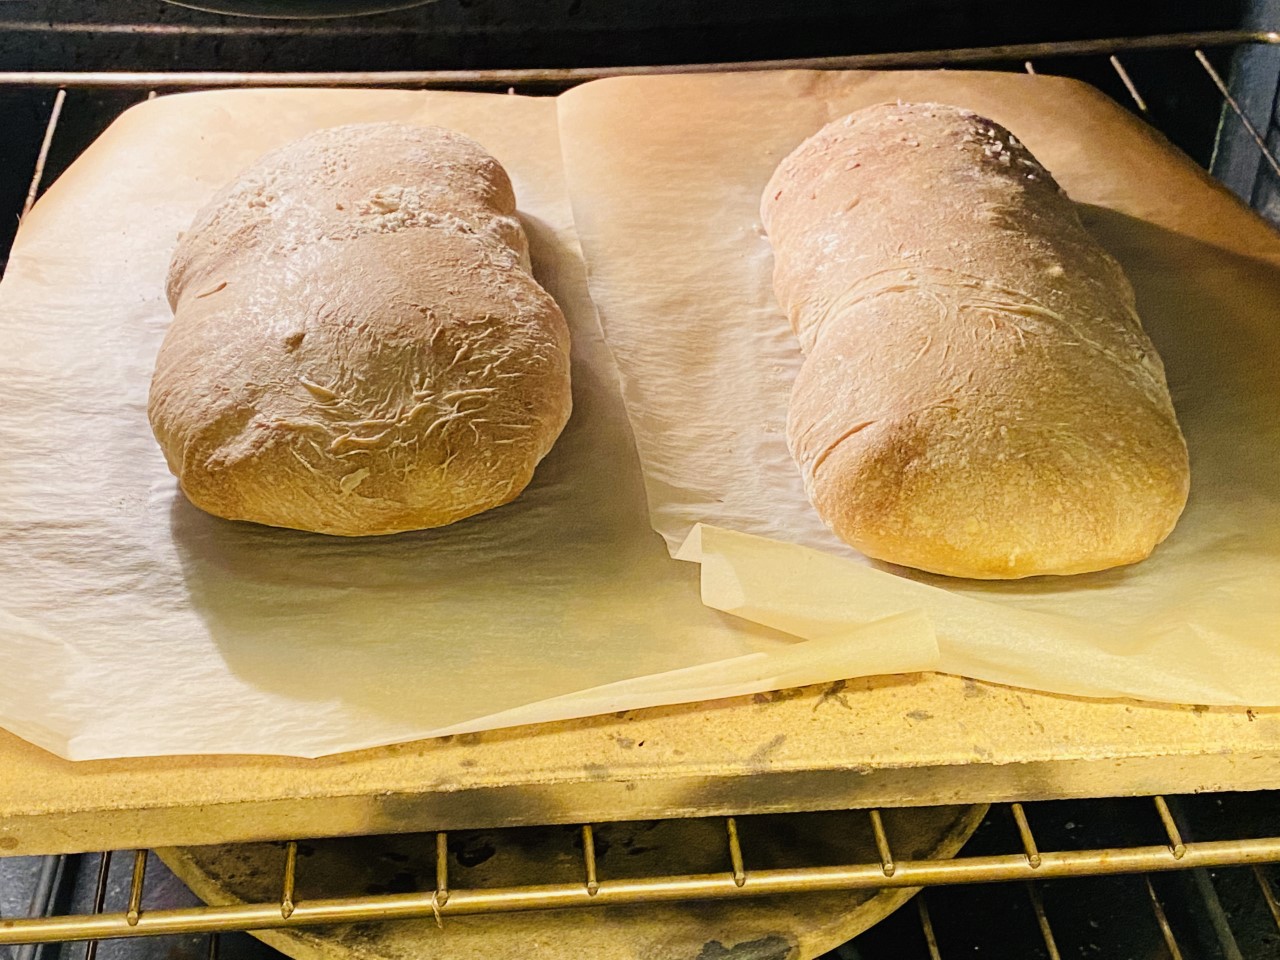 two loaves of ciabatta baking on a stone in the oven.